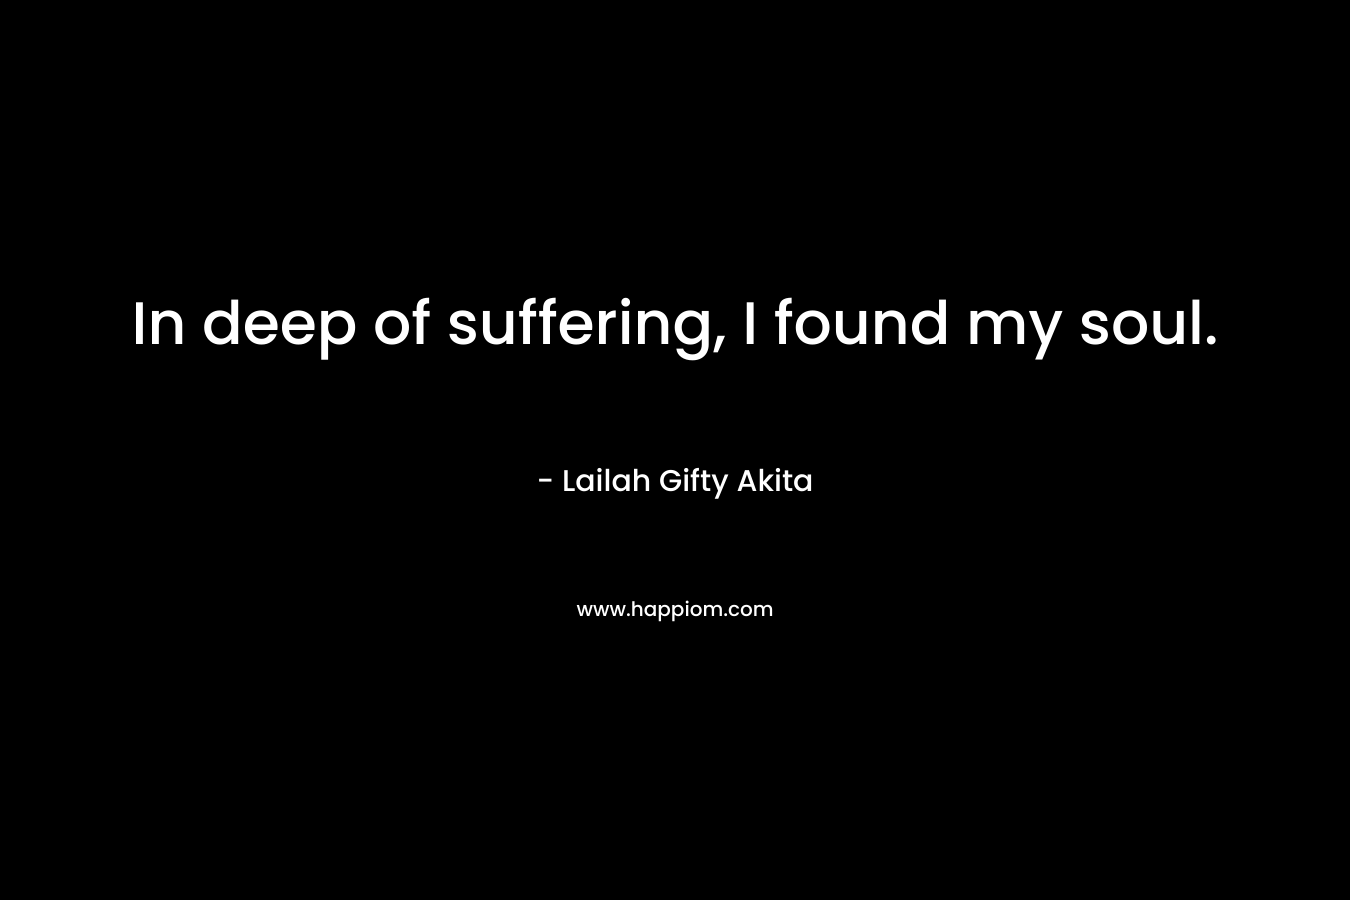 In deep of suffering, I found my soul.